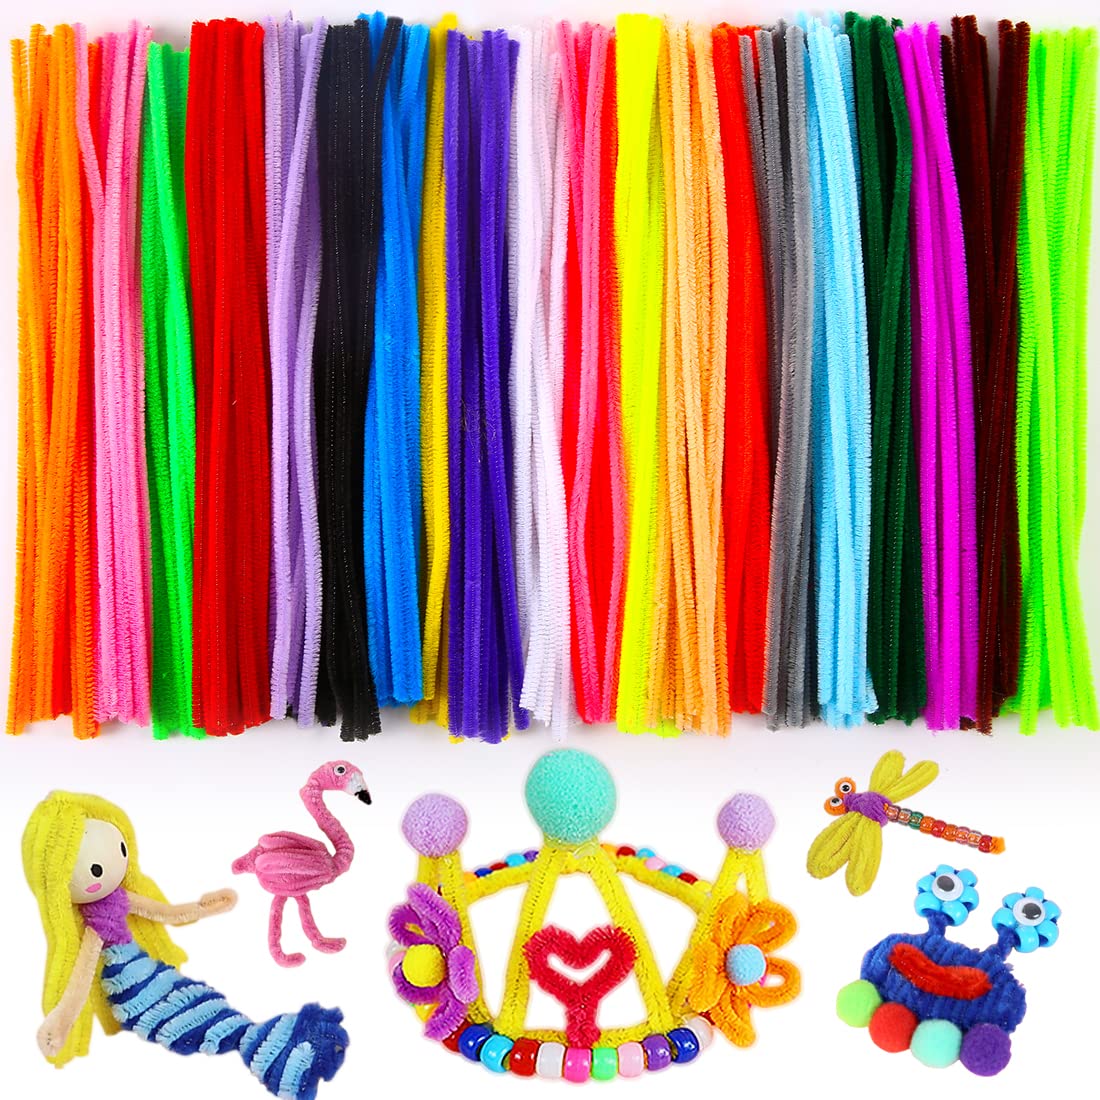 Pipe Cleaners, Pipe Cleaners Craft, Arts and Crafts, Crafts, Craft Supplies, Art Supplies (200 Multi-Color Pipe Cleaners)…